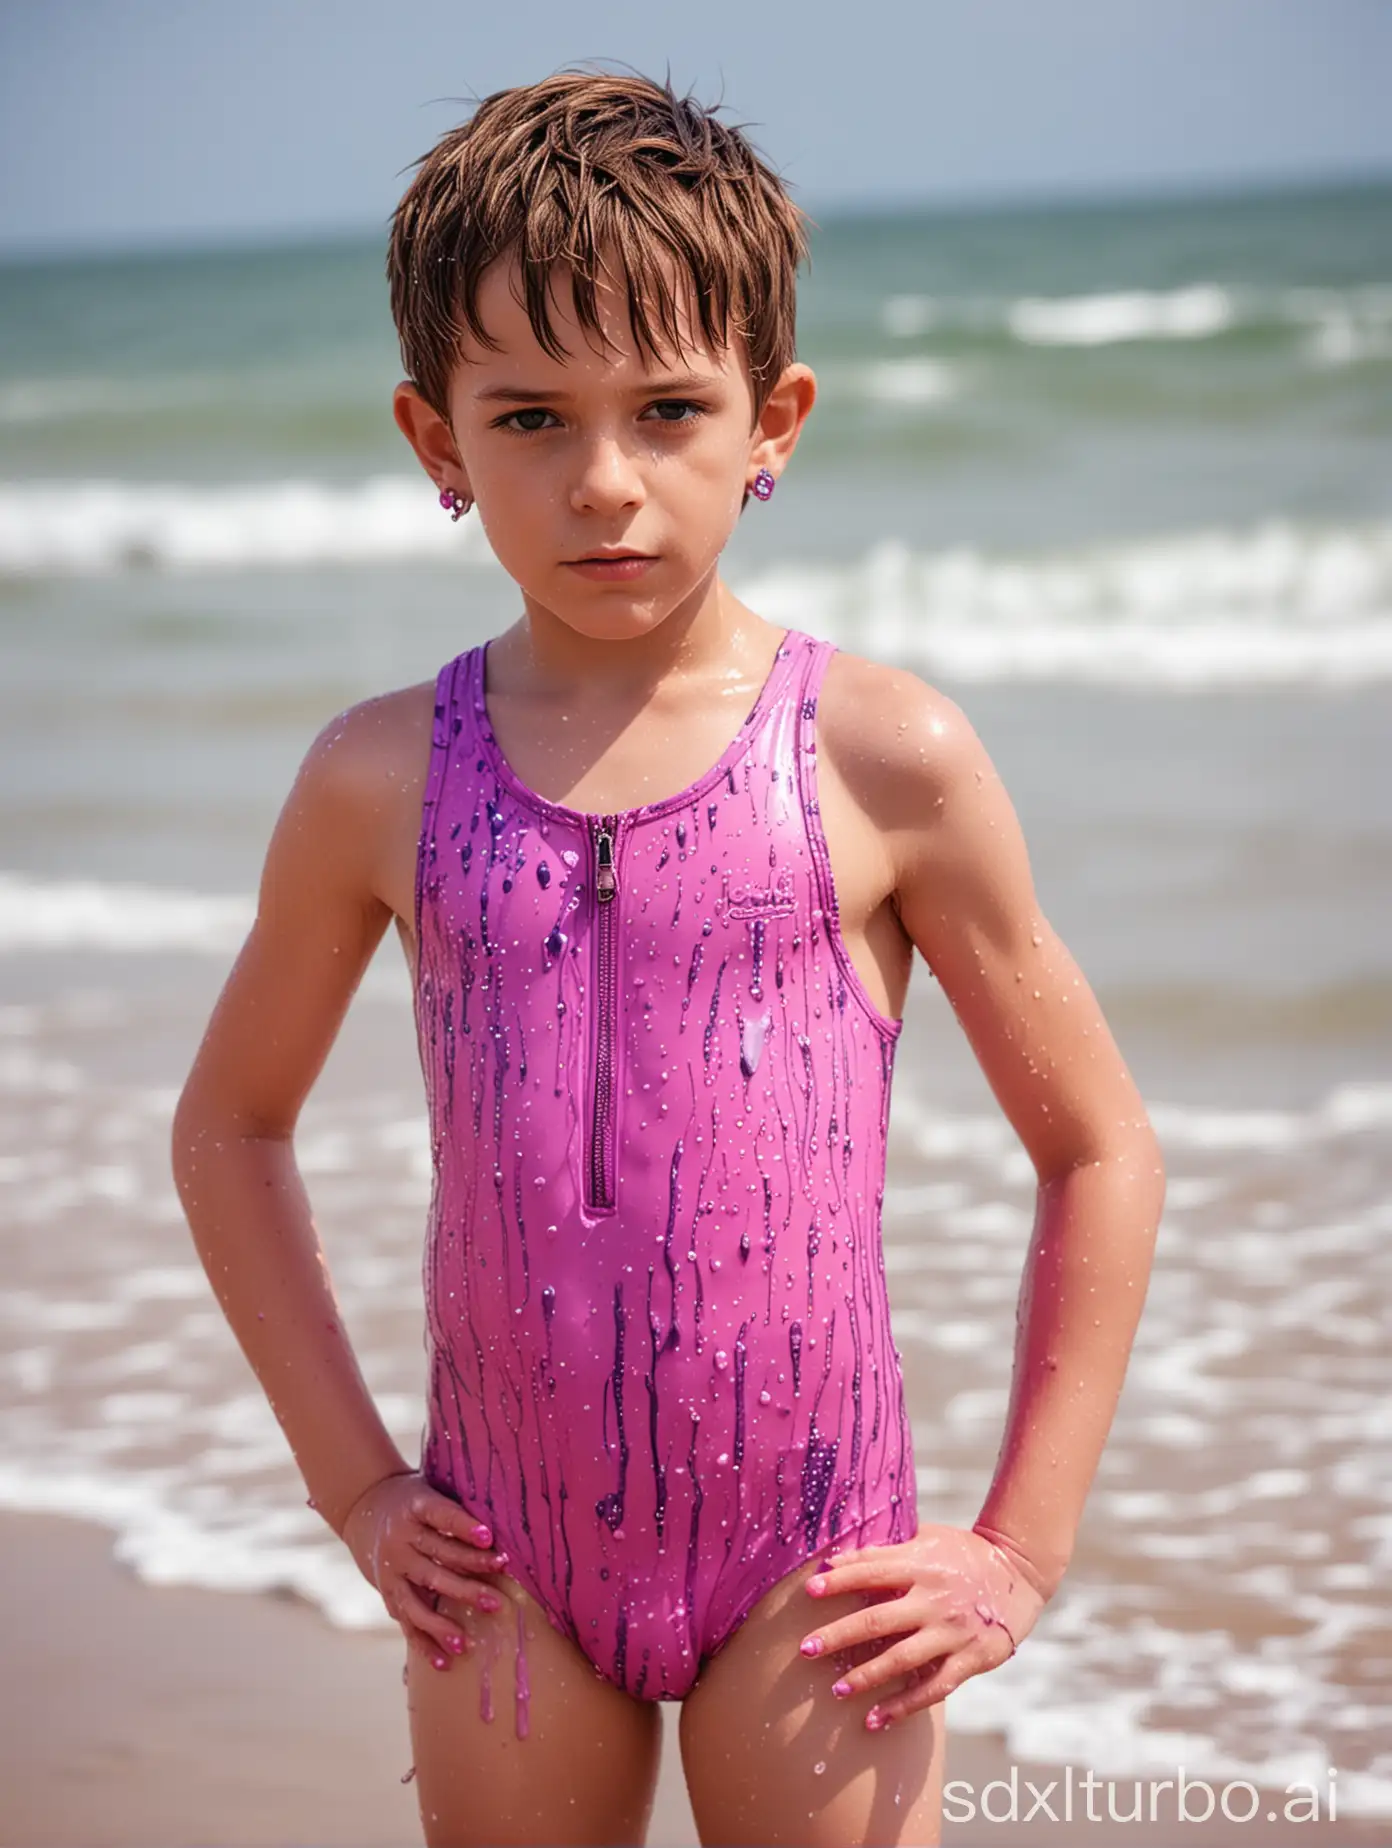 Serious-8YearOld-Boy-in-Pink-and-Purple-Swimsuit-at-Beach